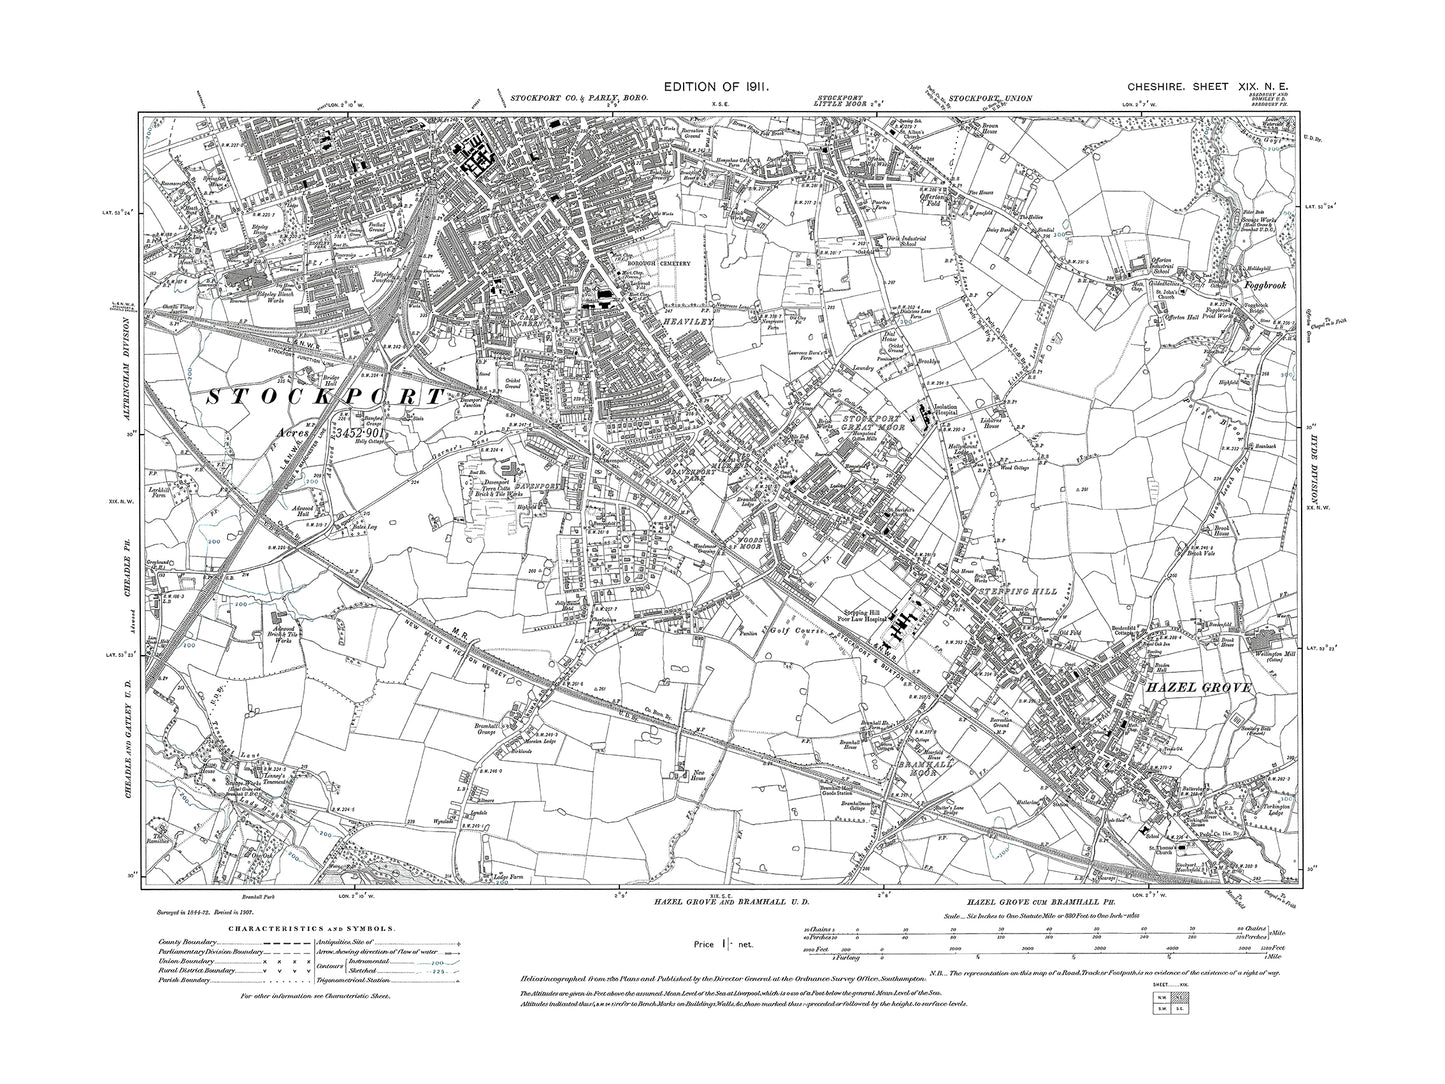 Old OS map dated 1911, showing Stockport (south), Hazel Grove in Cheshire 19NE